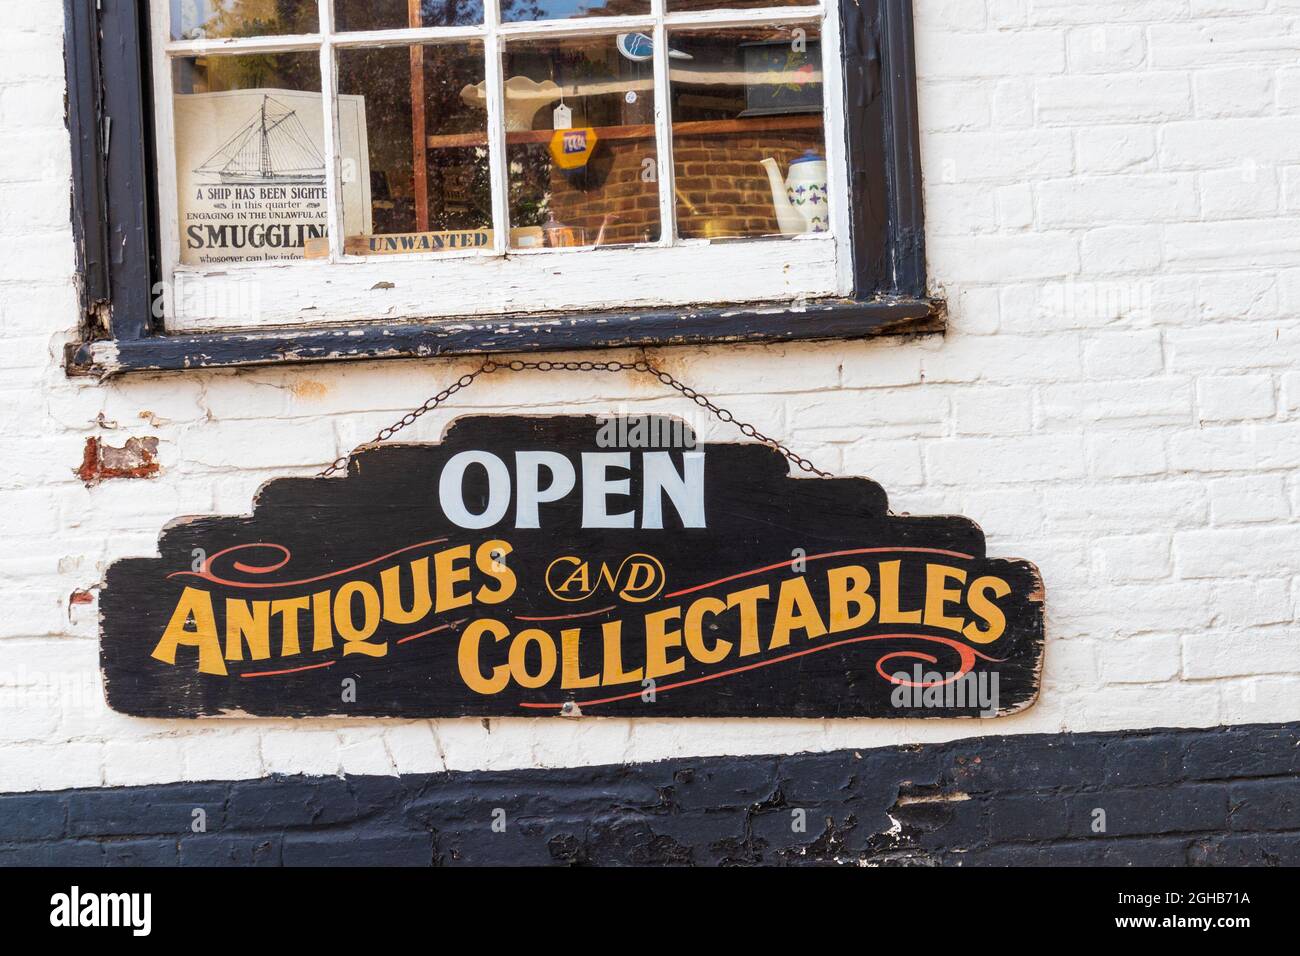 Open Antiques and collectables sign, rye, east sussex, uk Stock Photo